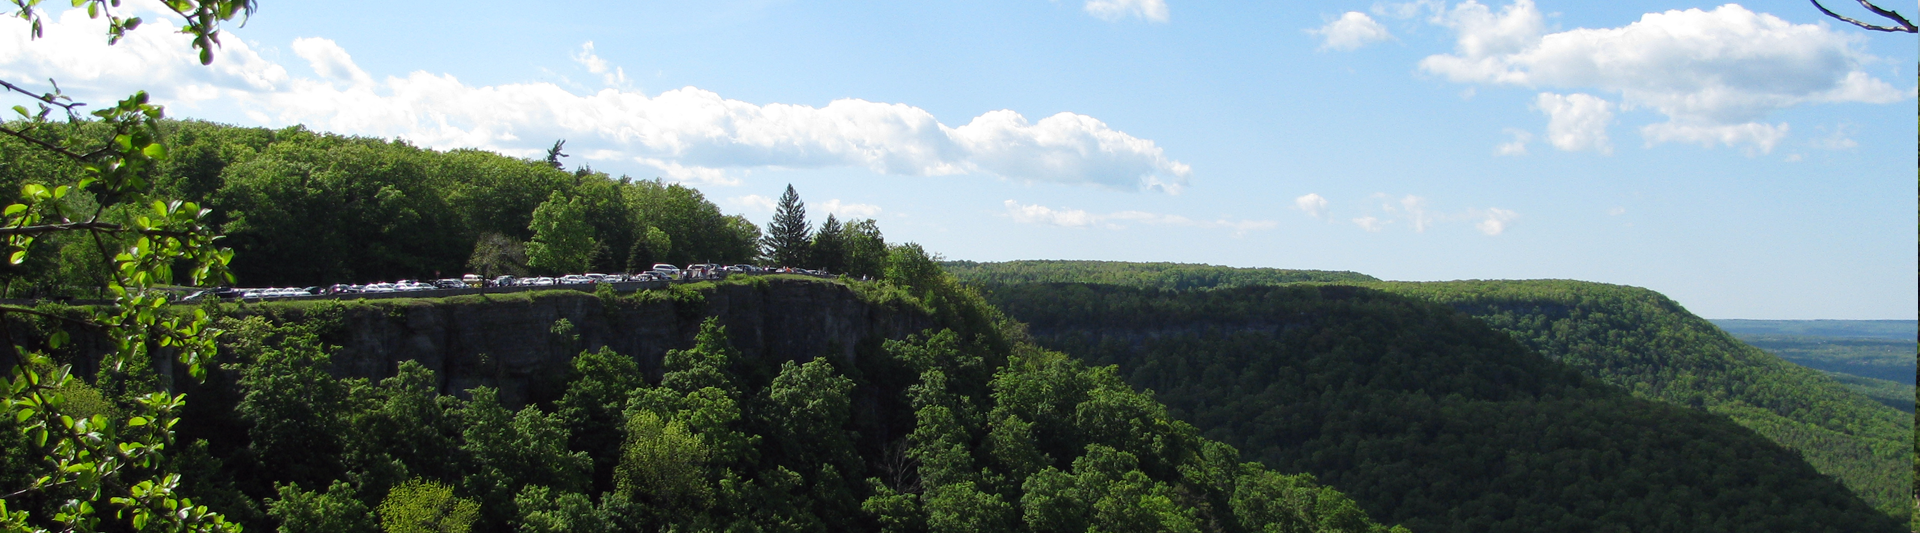 Friends of Thacher State Park